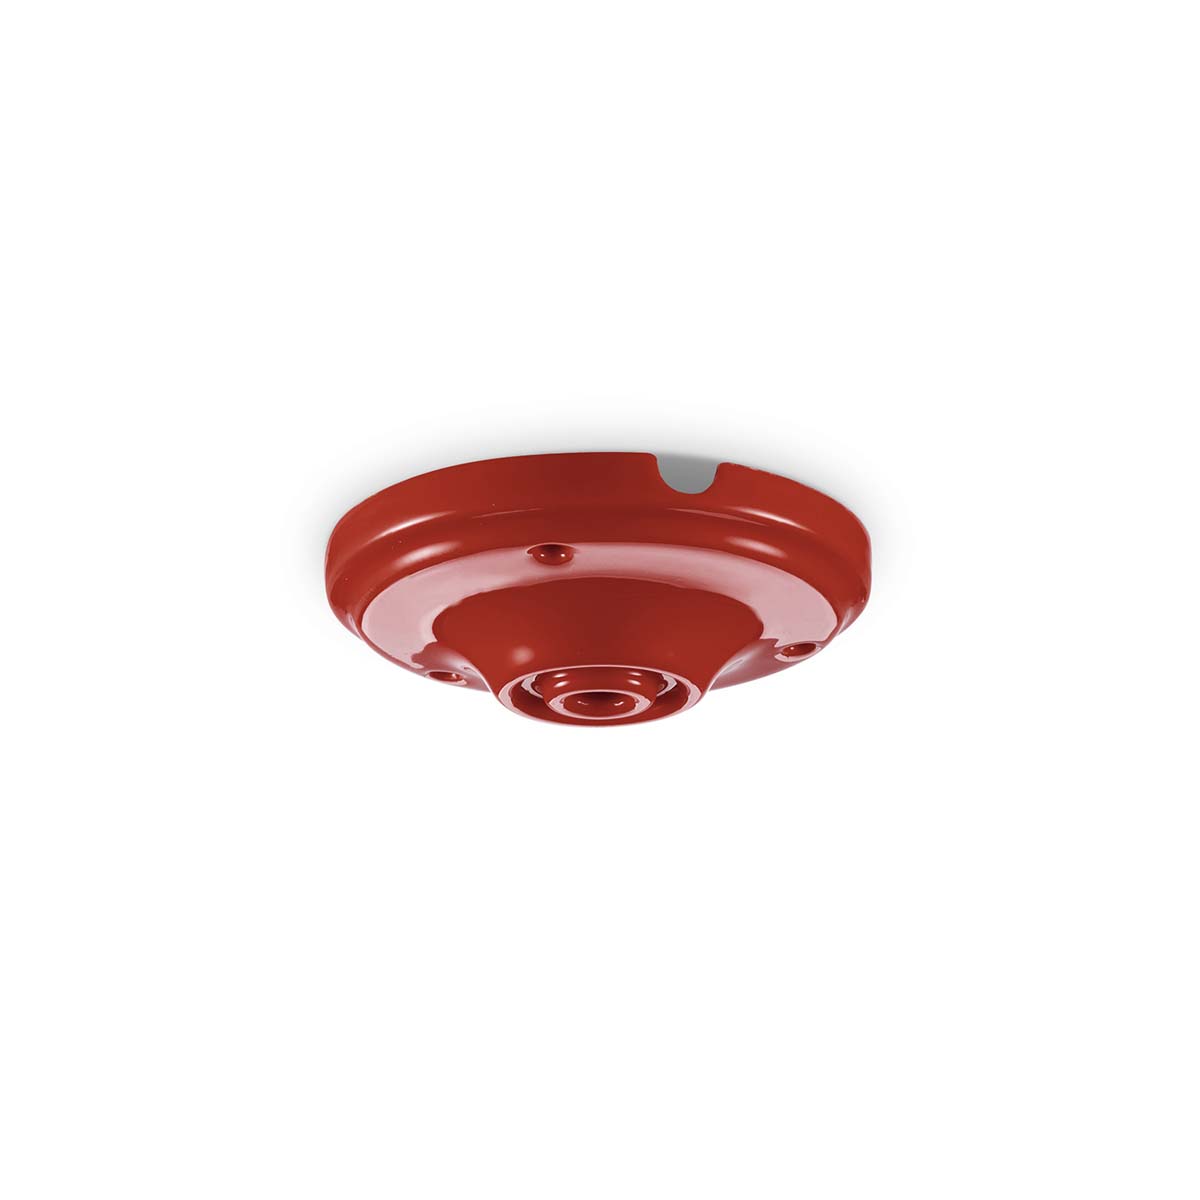 Tangla lighting - TLCP023-01RD - porcelain 1 Light round canopy frisbee - red